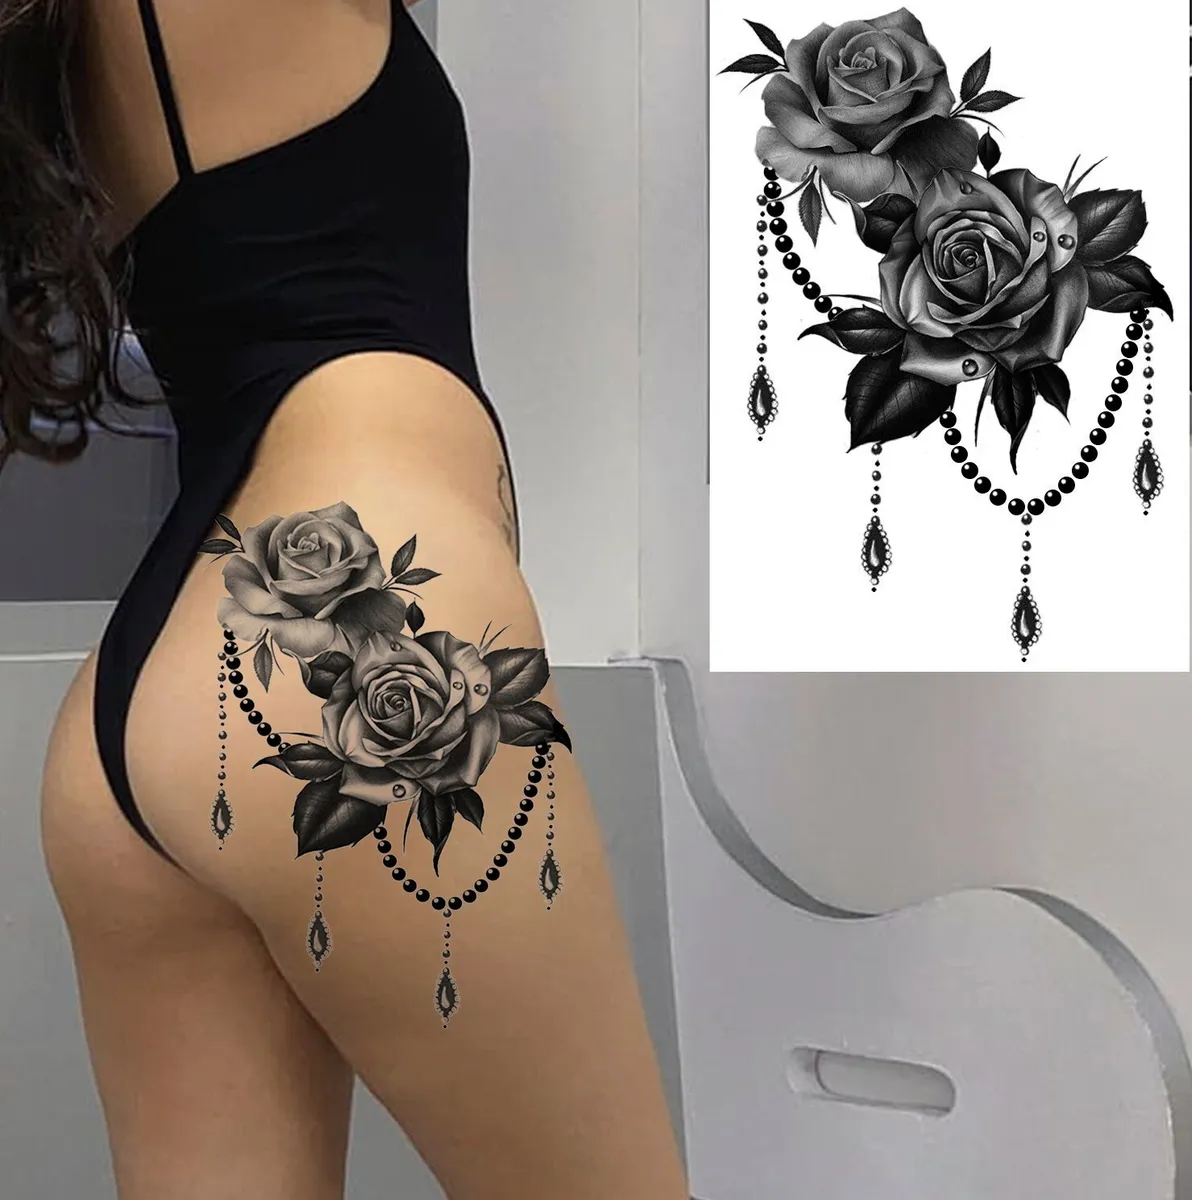 delmy guevara recommends tattoo on booty pic